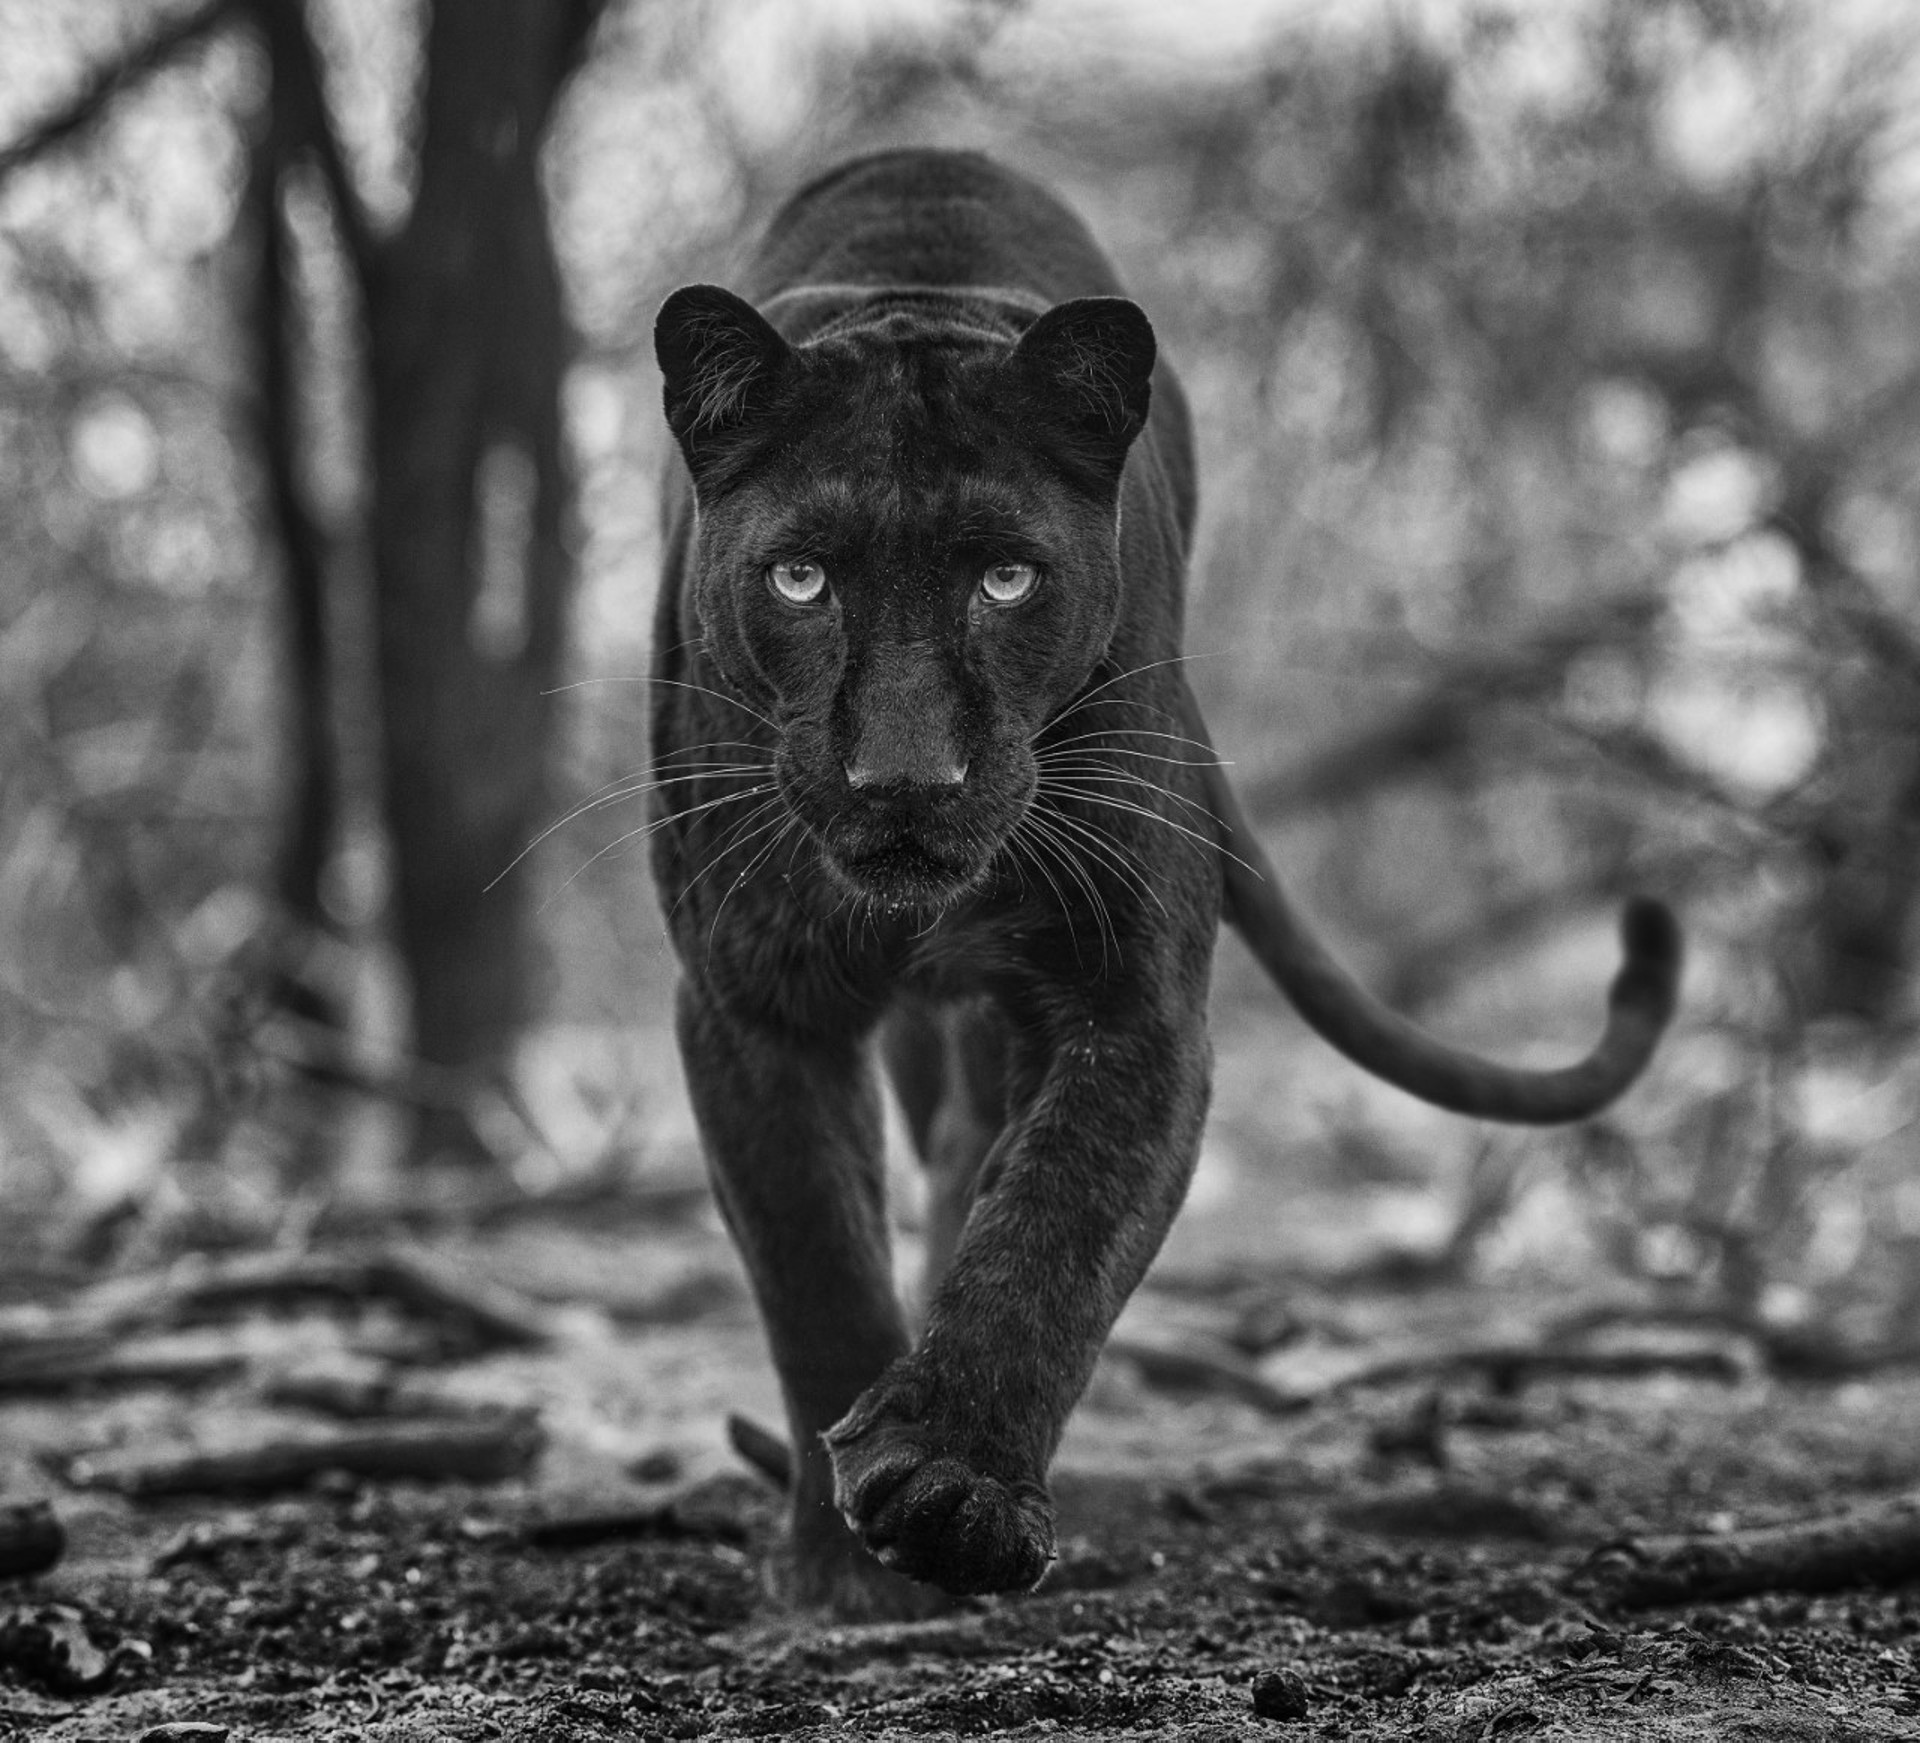 Remains of the Day by David Yarrow